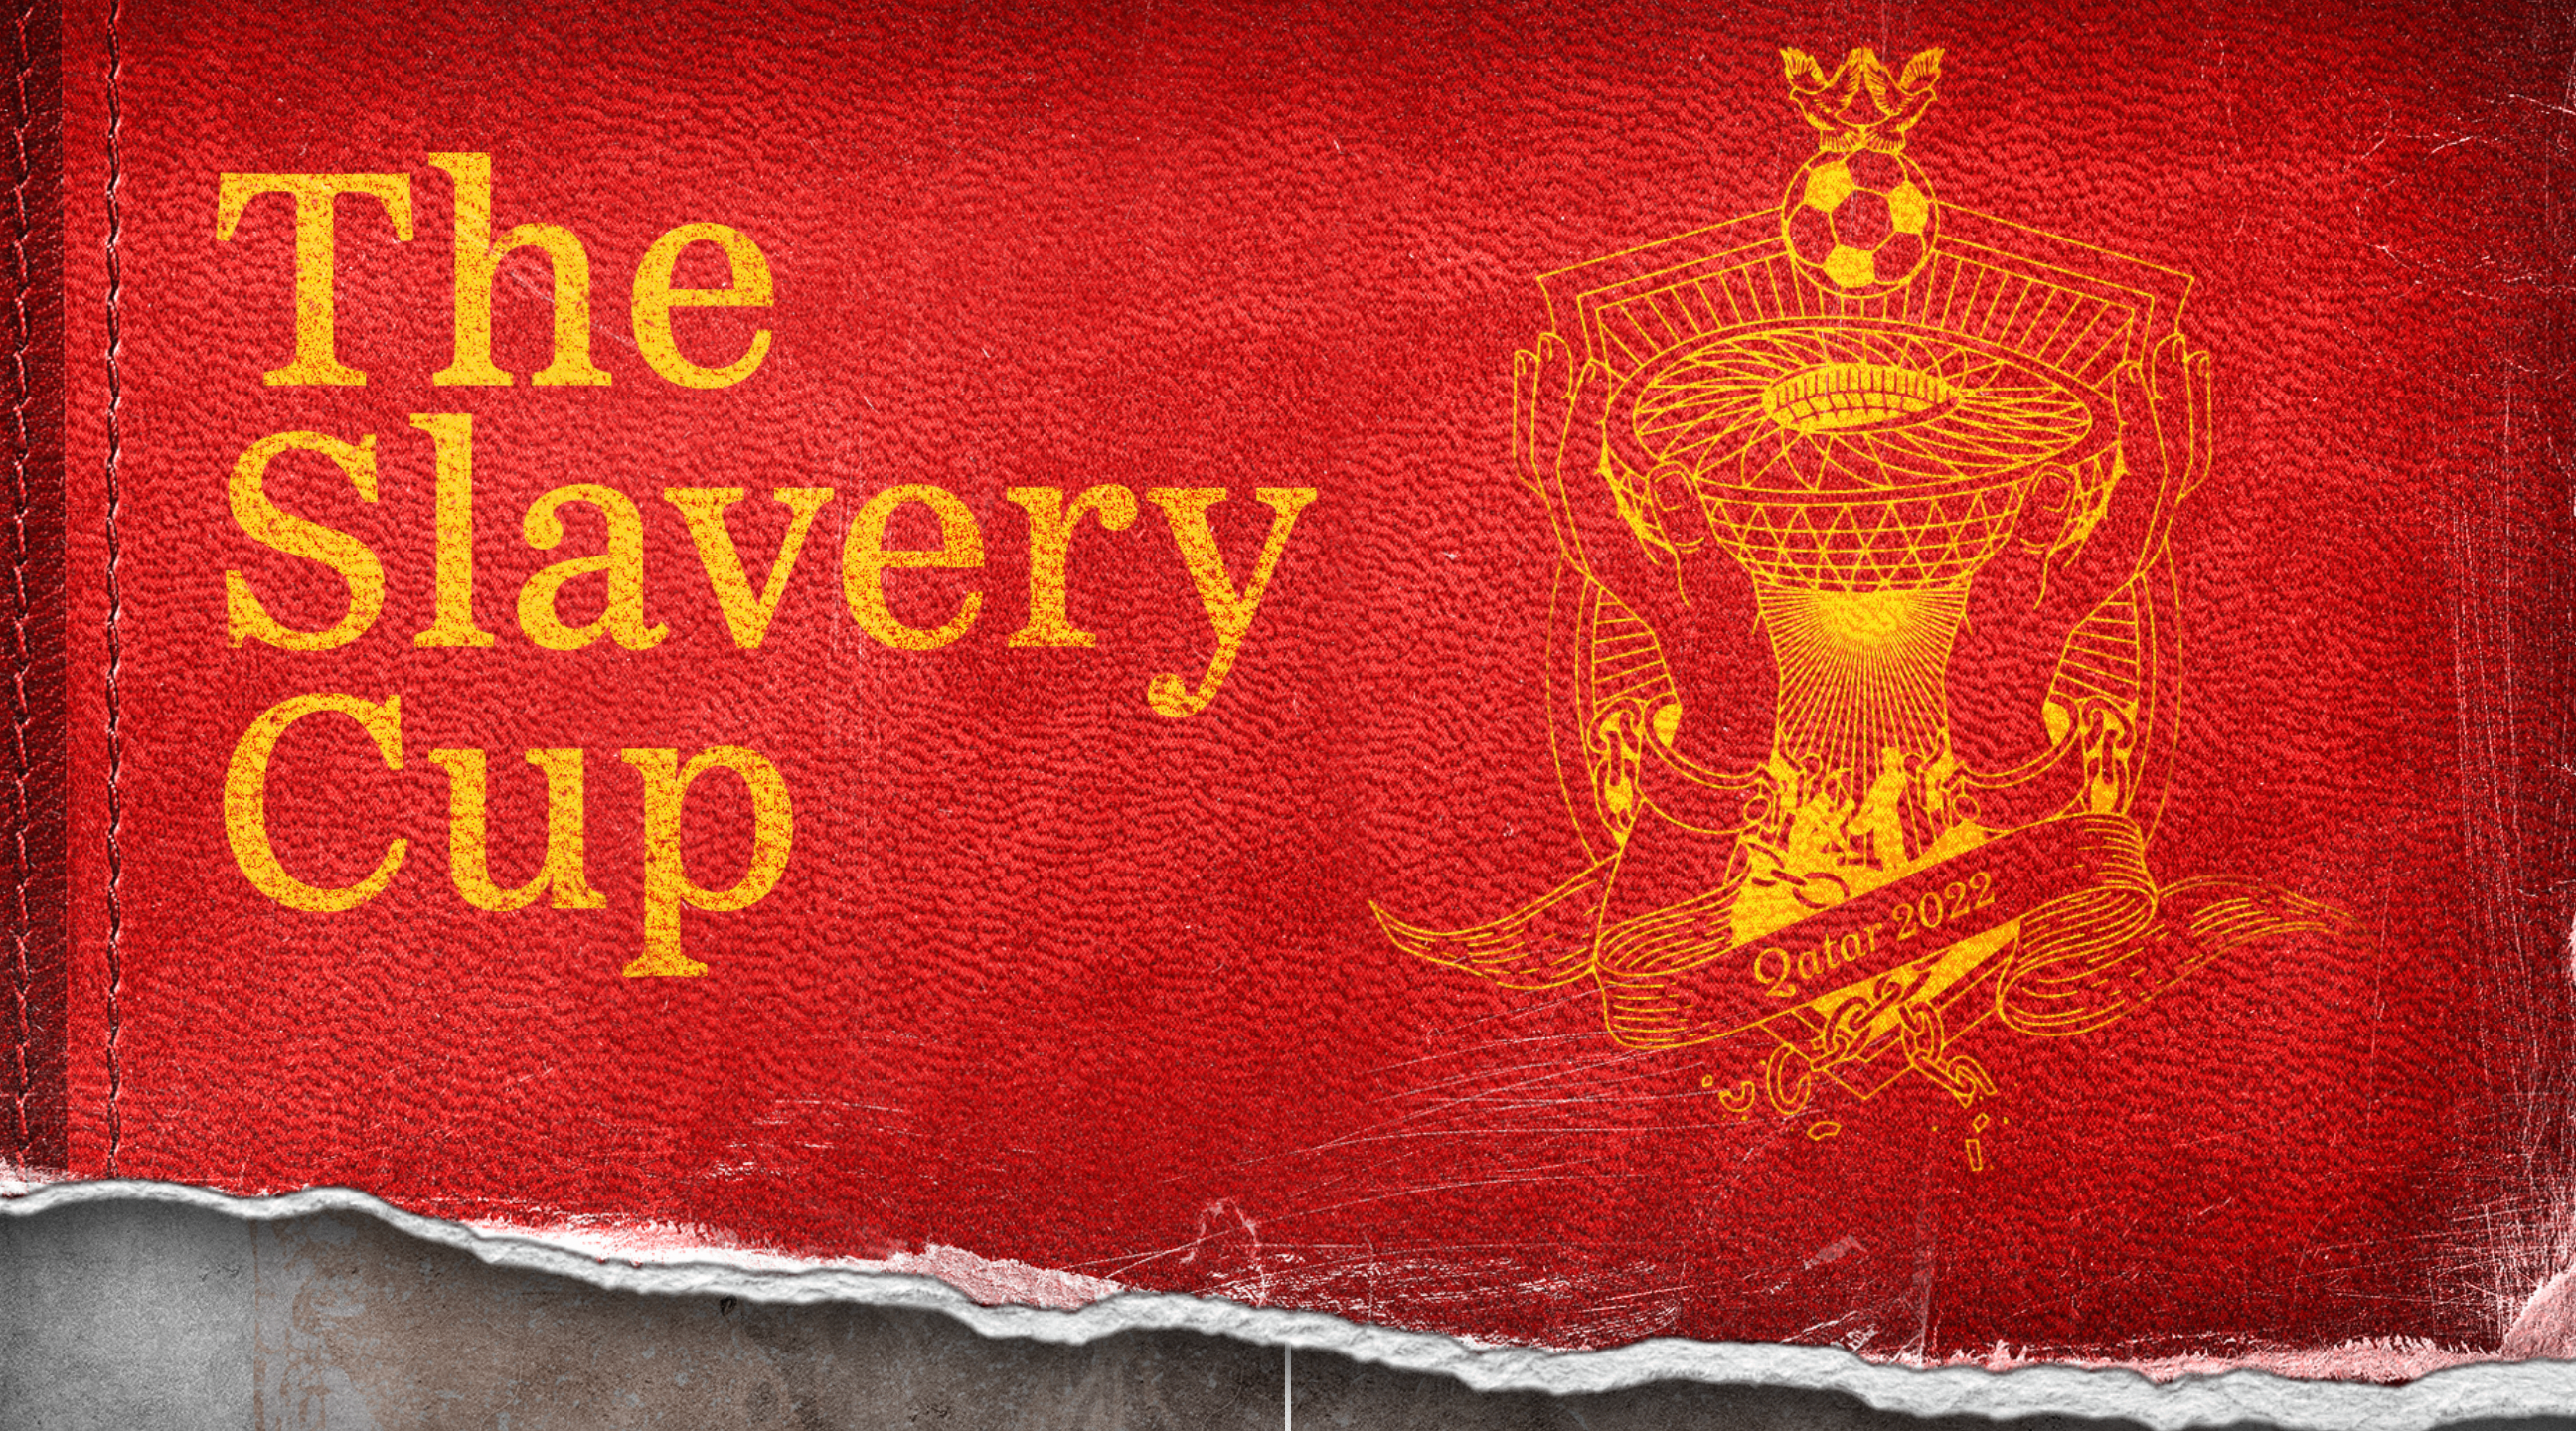 a screenshot from "The Slavery Cup" website from Mojo Supermarket